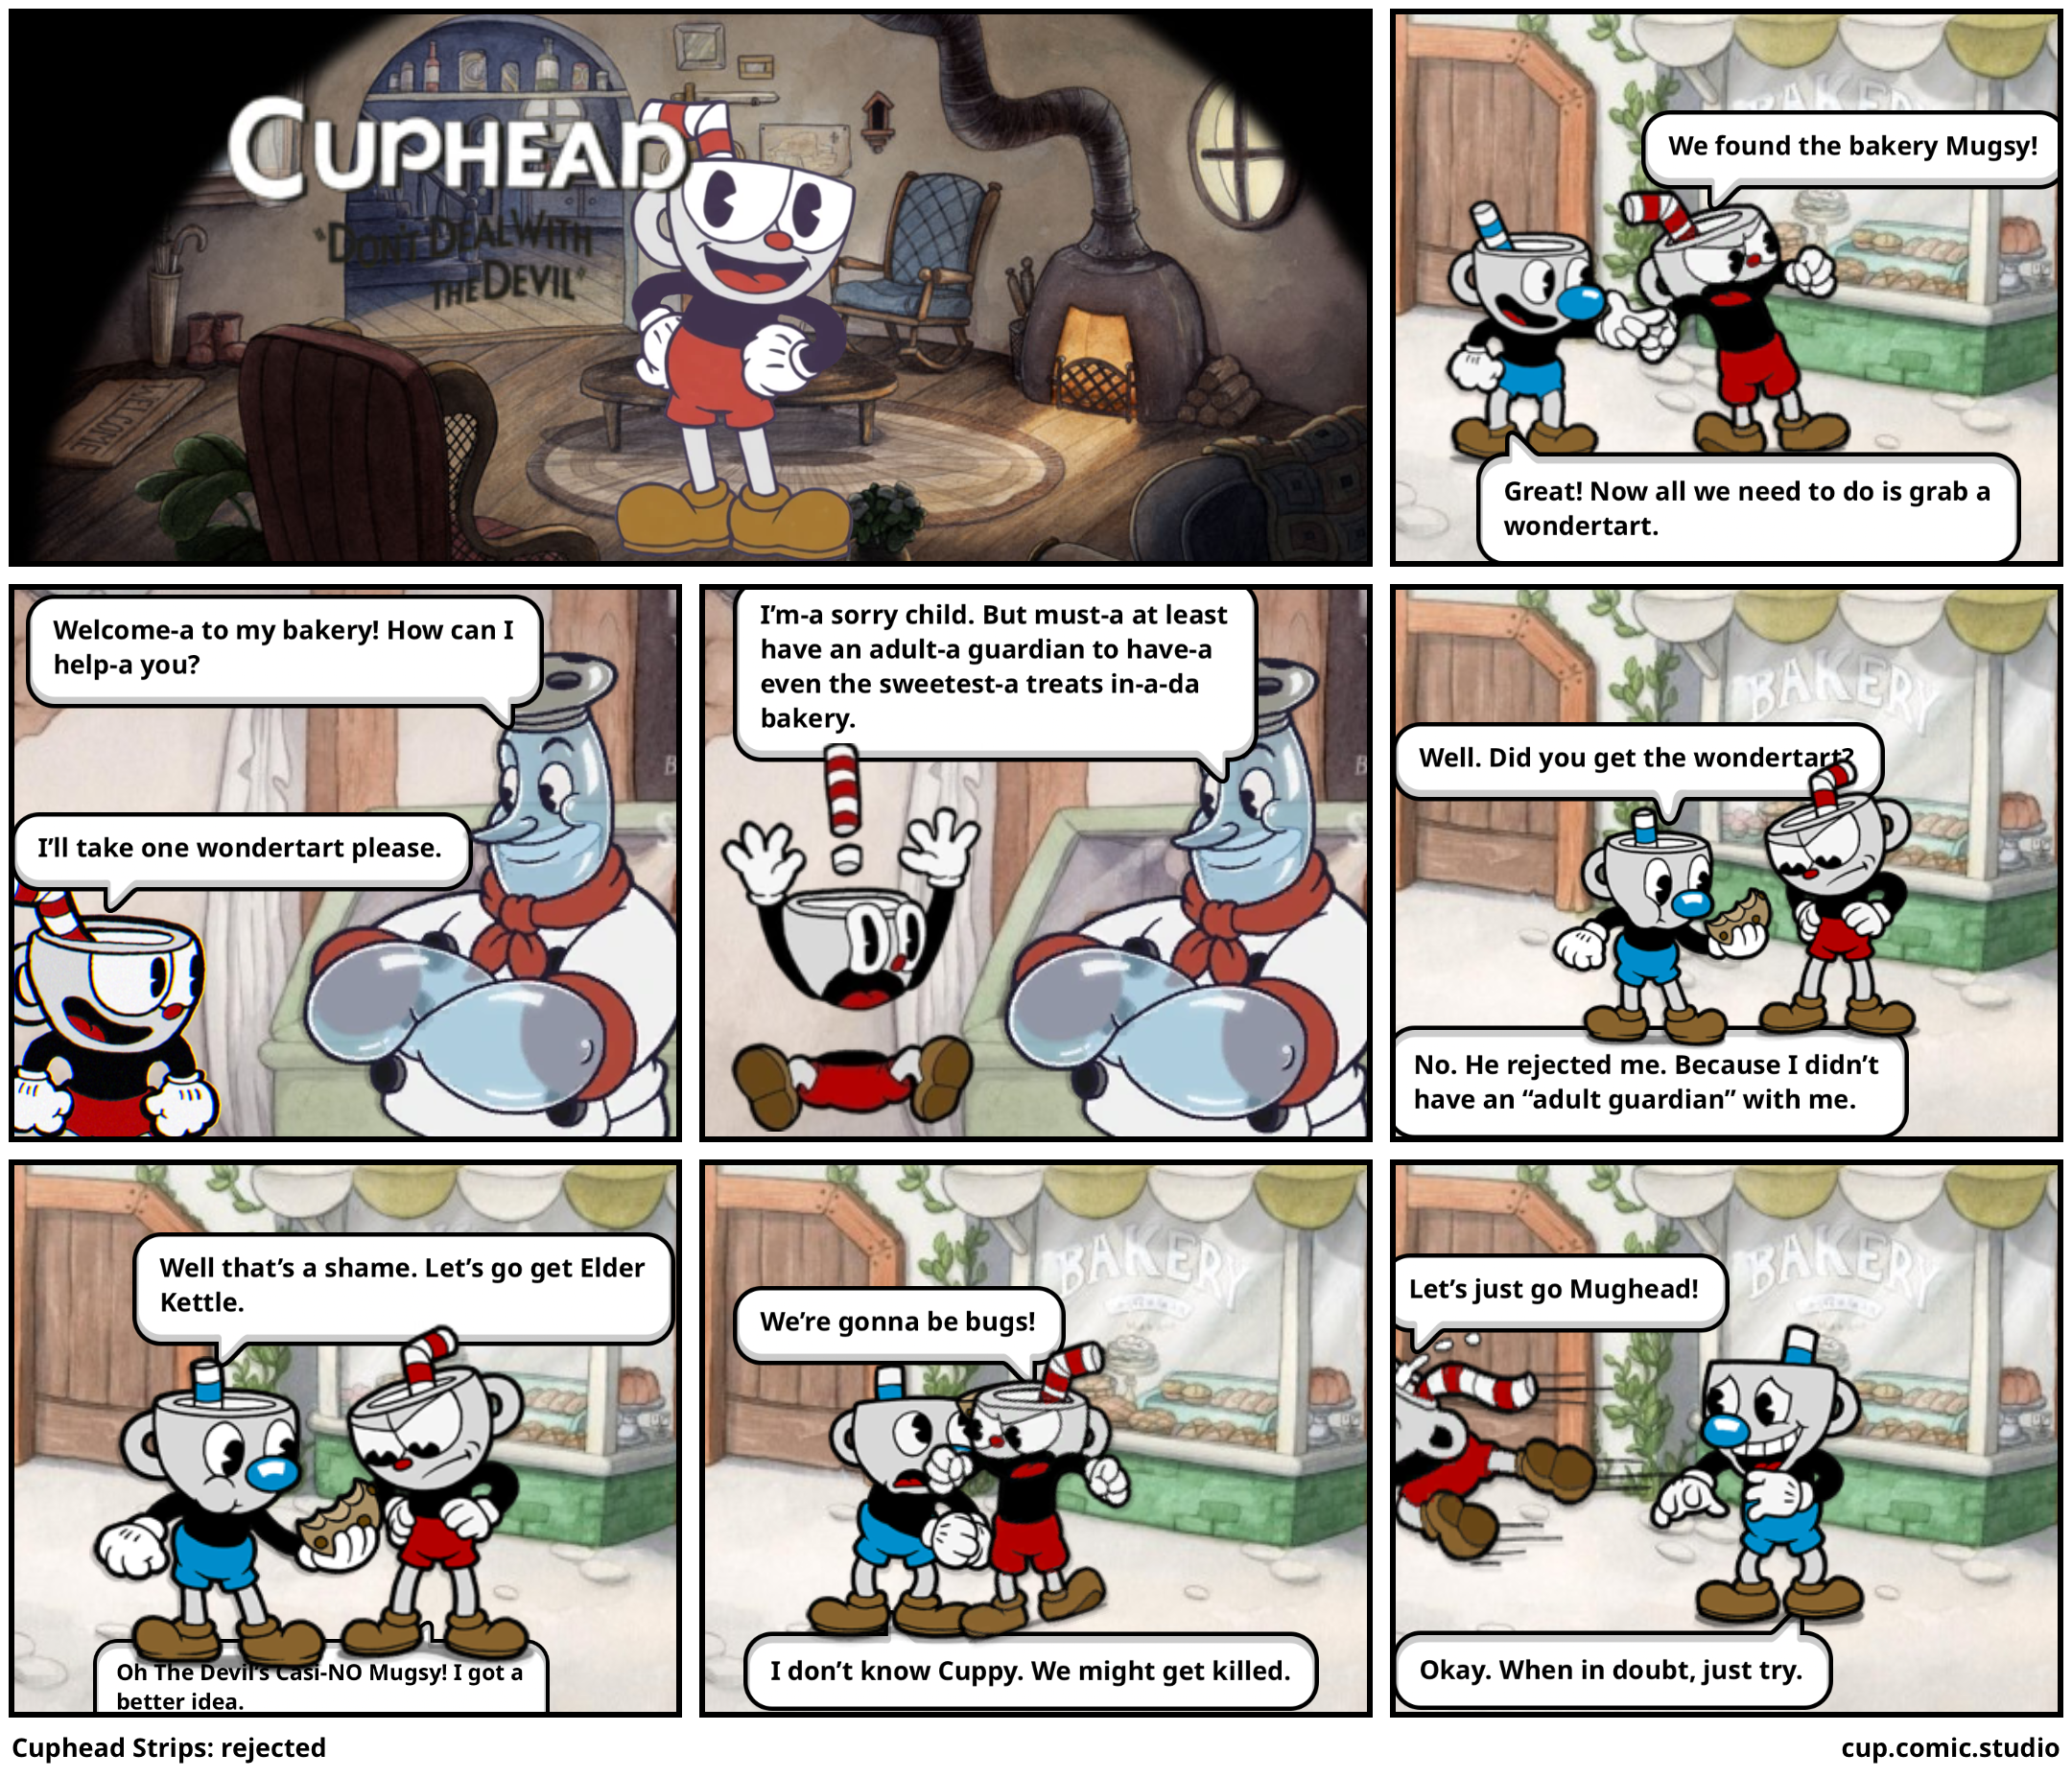 Cuphead Strips: rejected